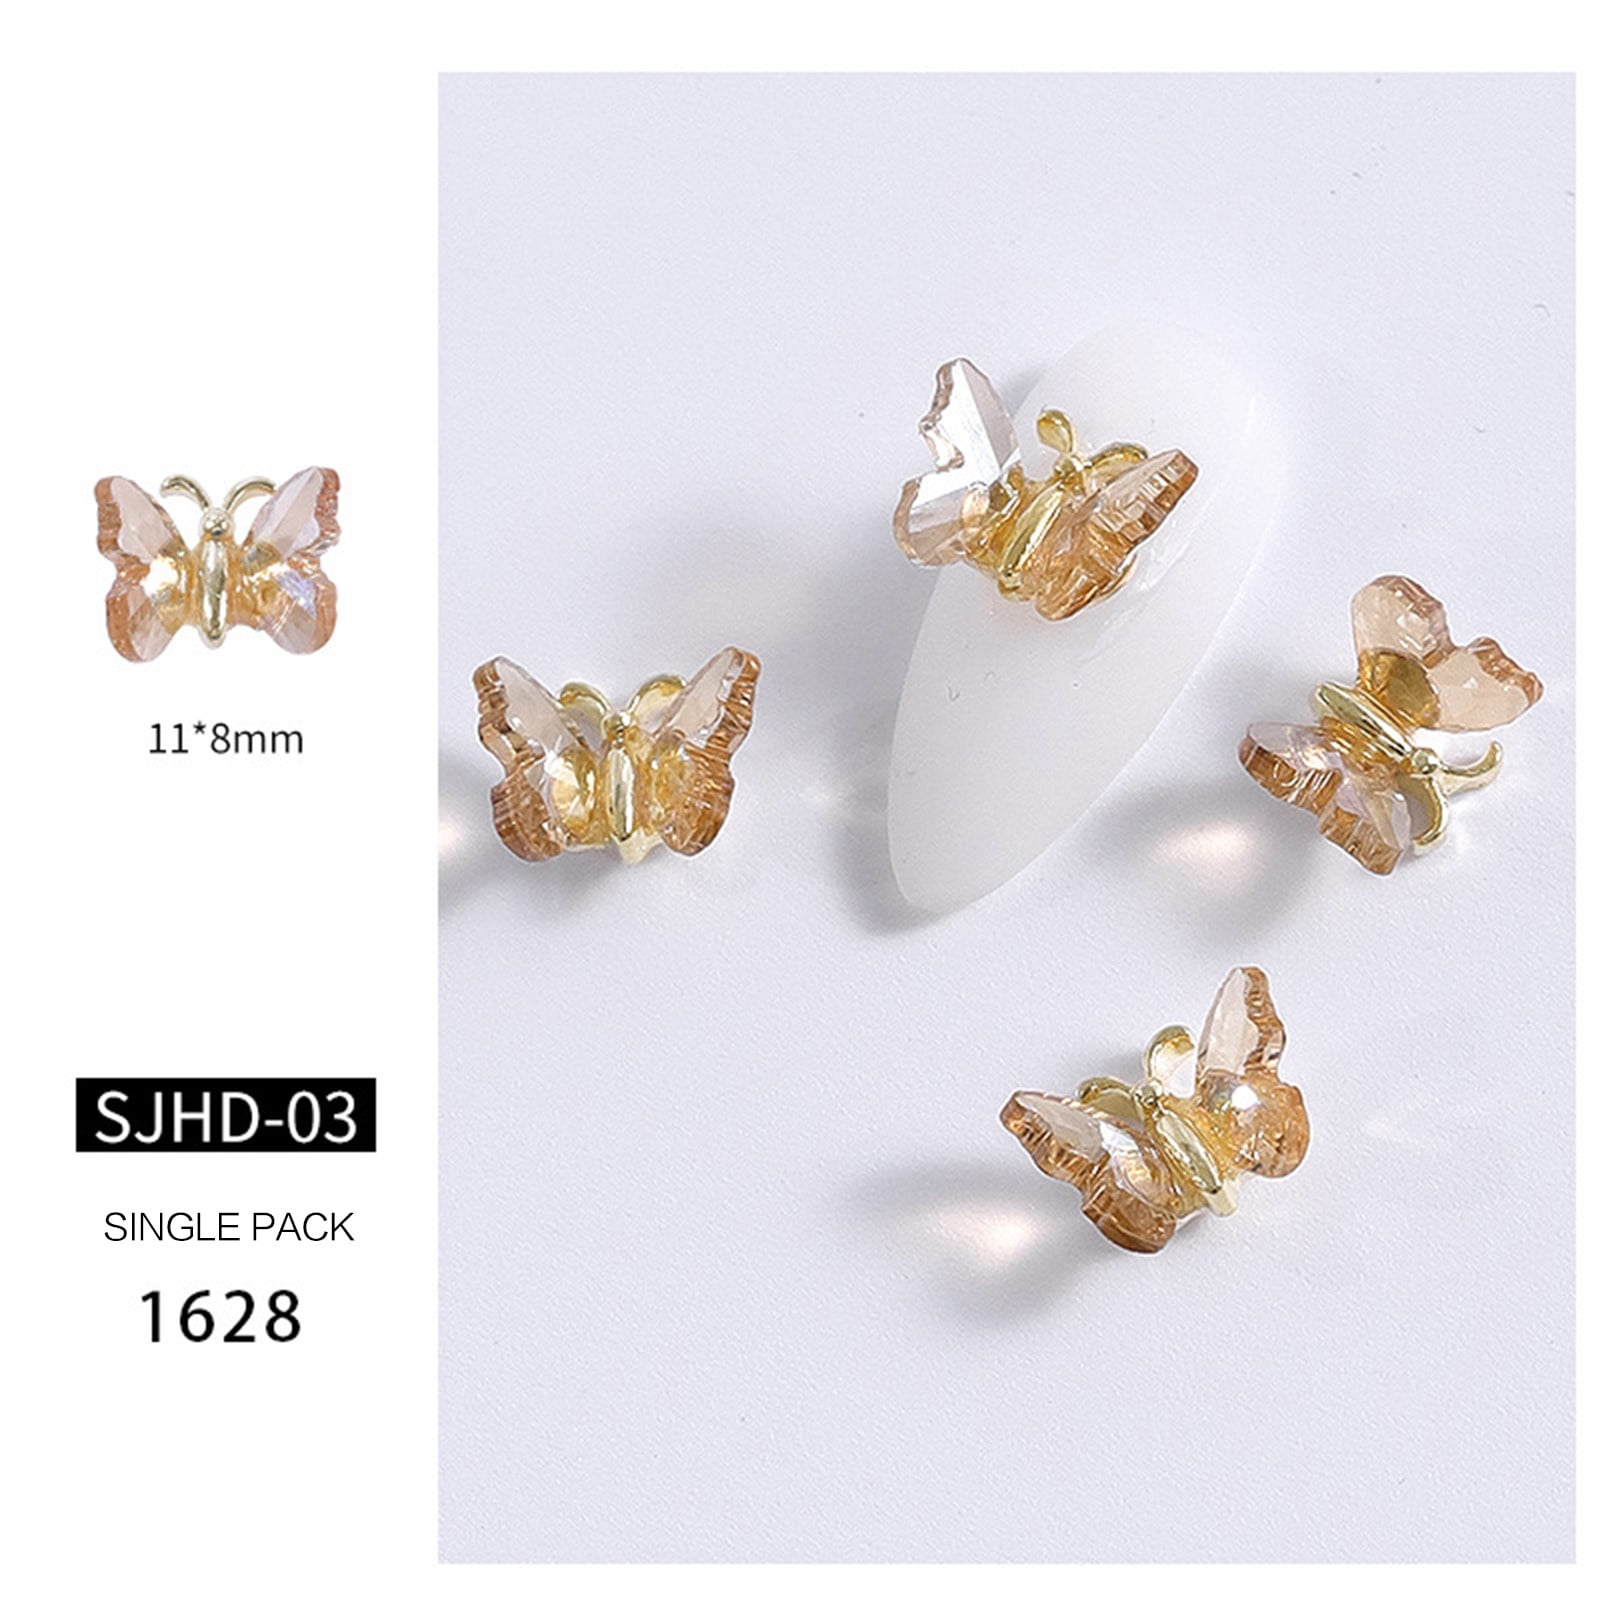 CZECH Clear GLASS Rhinestone Crystal Rapid Rivet Stud more chic gorgeous for bag pusre and craft project